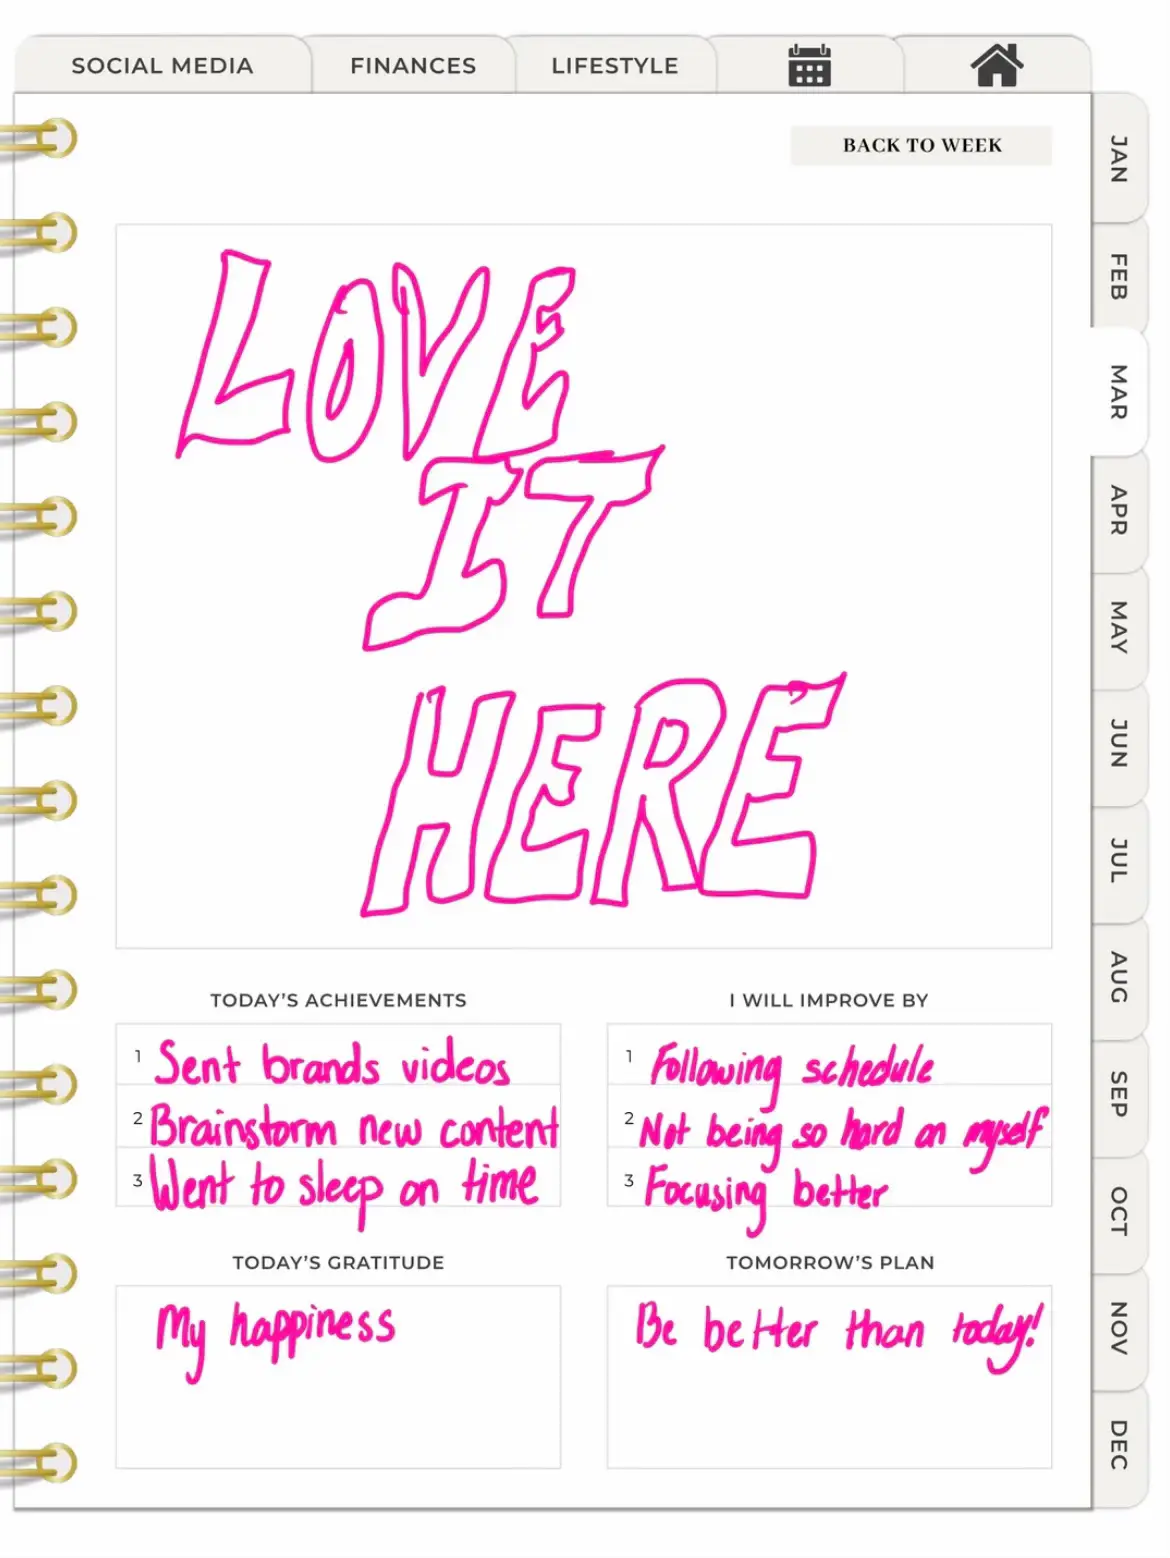  A planner with a pink